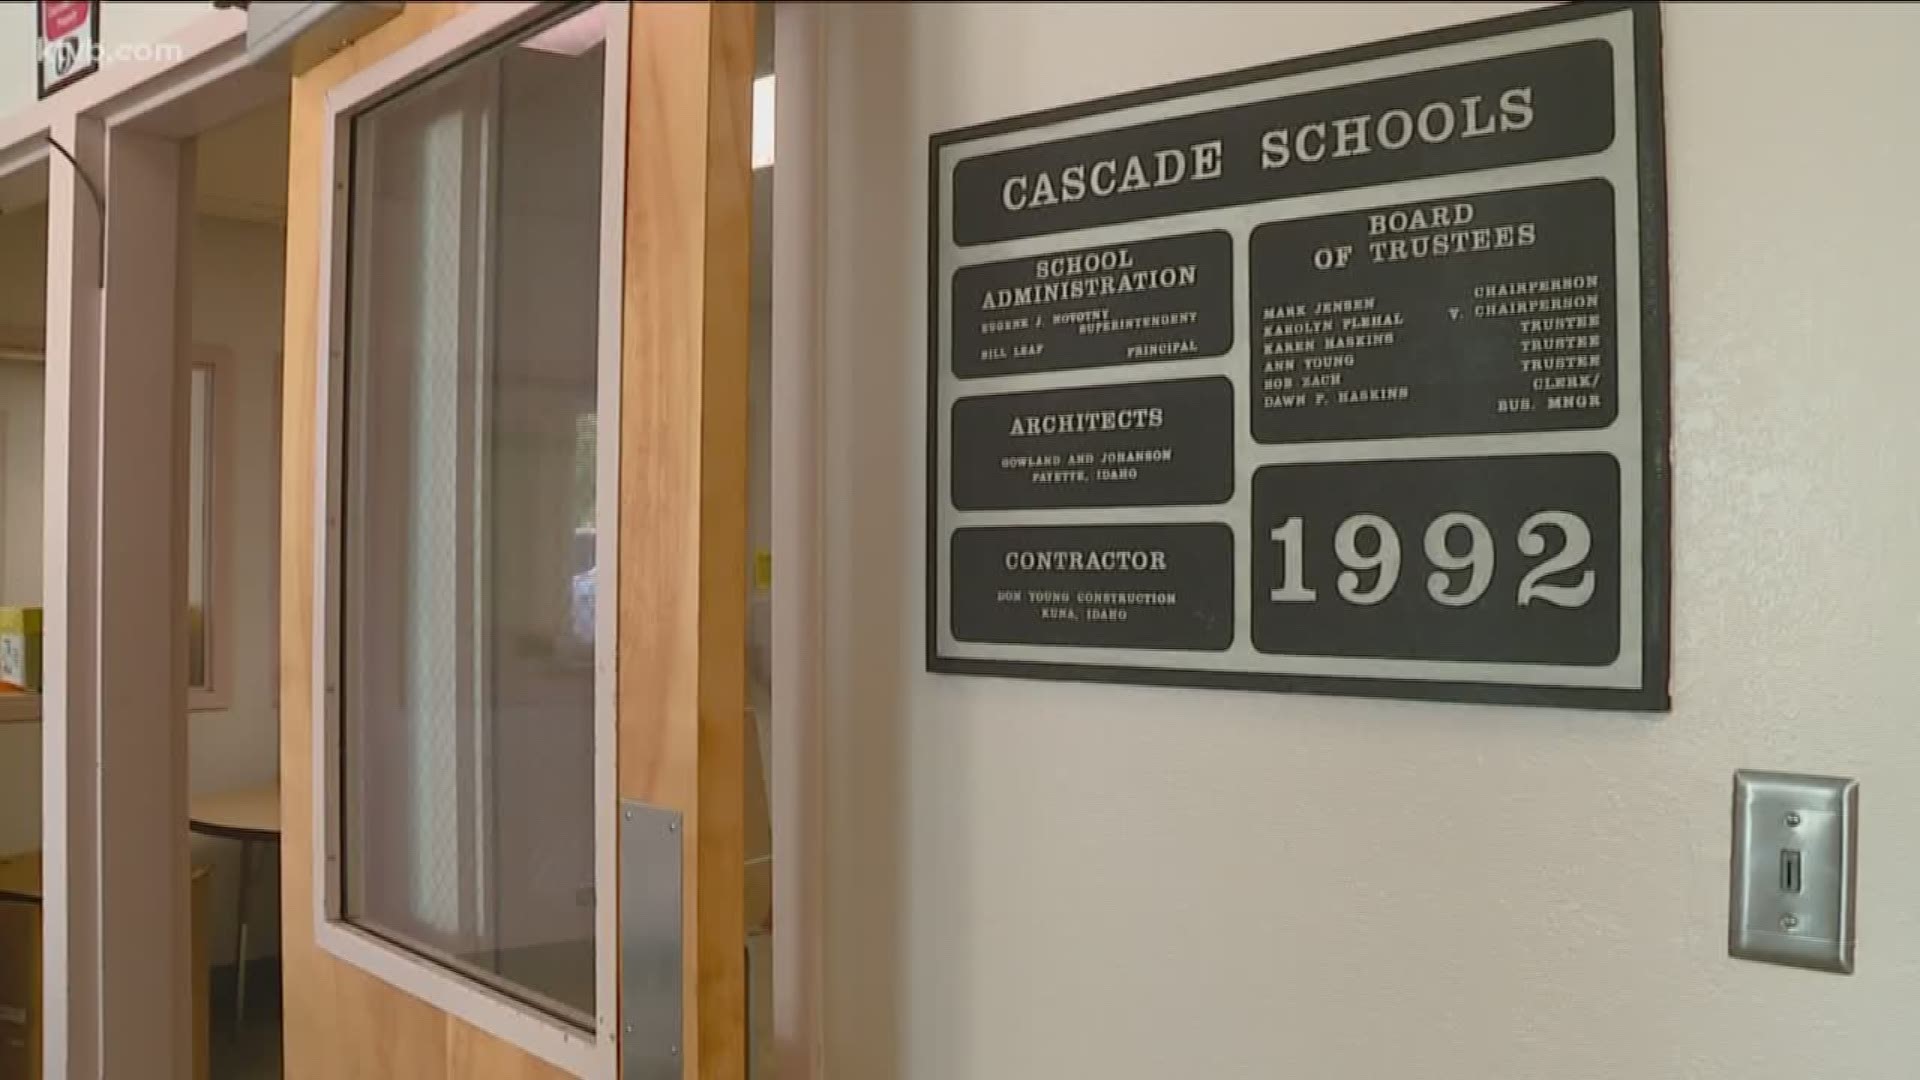 The Cascade School District is looking at cuts across the board, from supplies to programs, to staff and teachers.